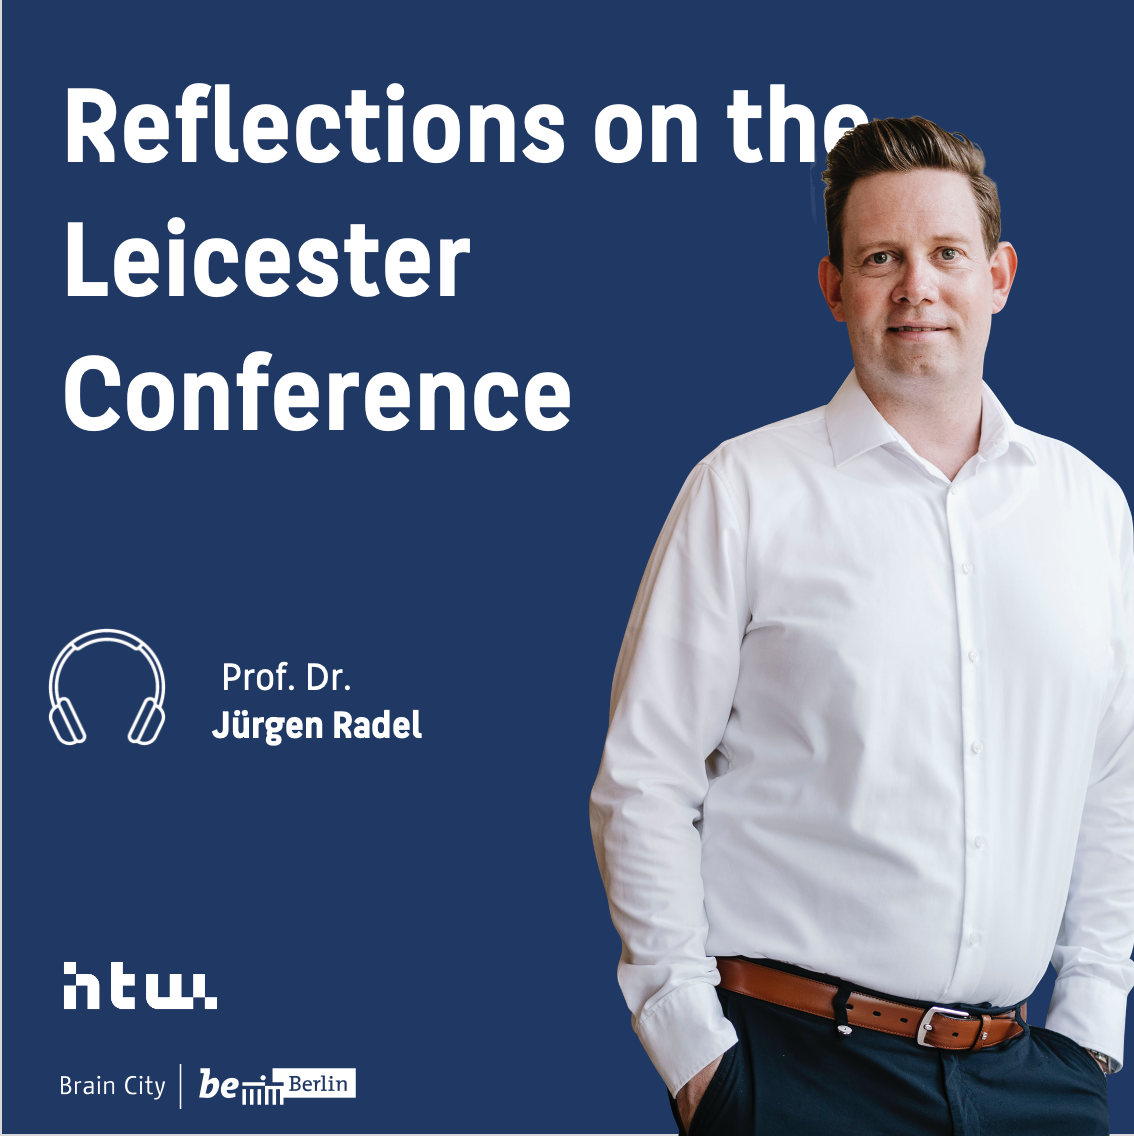 Reflections on the Leicester Conference